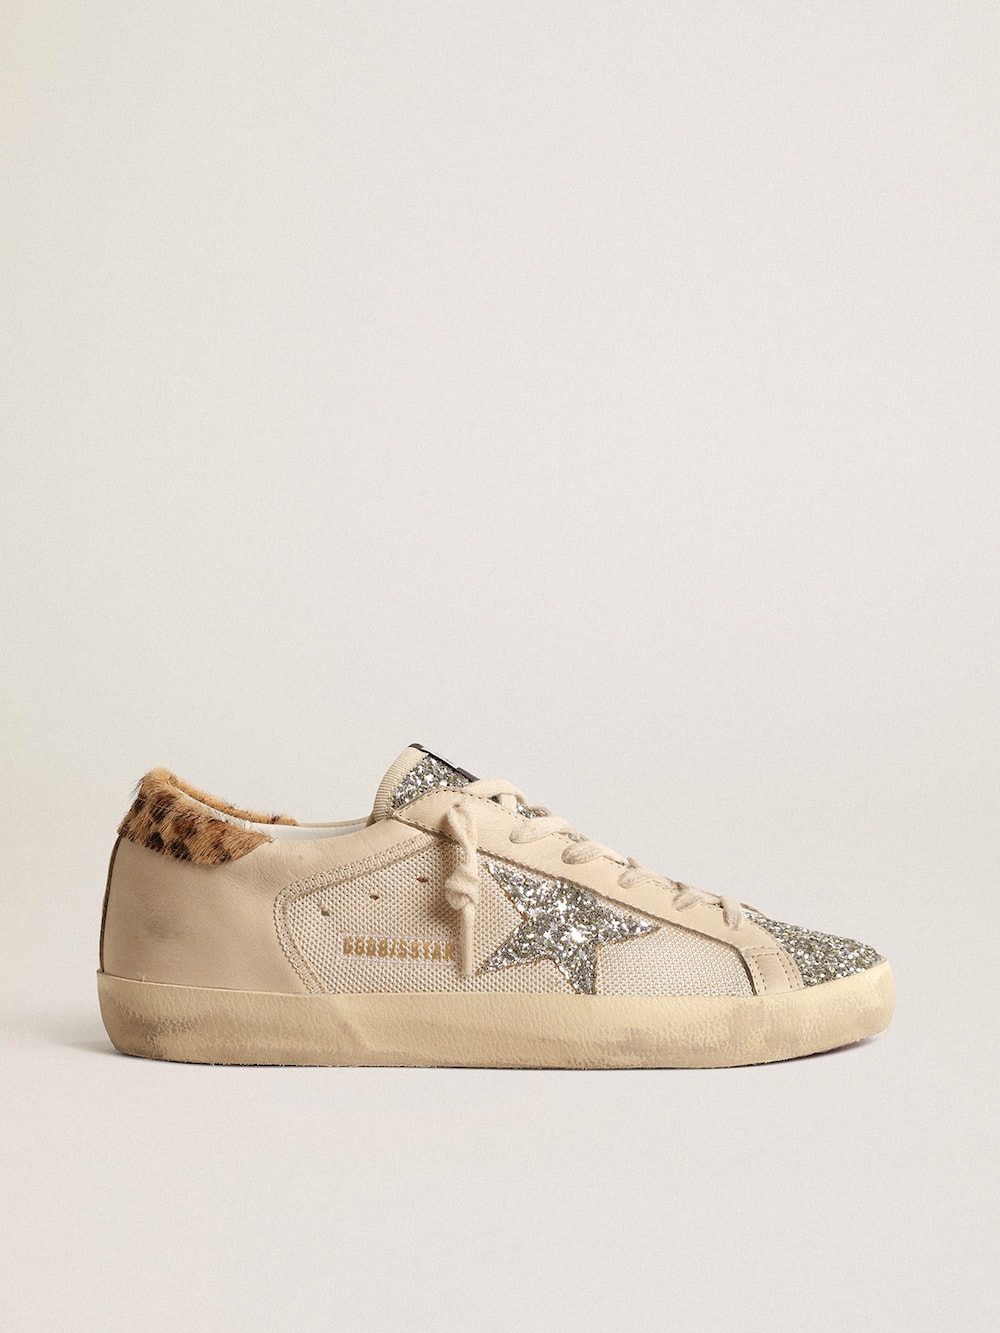 Golden Goose - Super-Star in cream mesh with glitter star and leopard heel tab in 